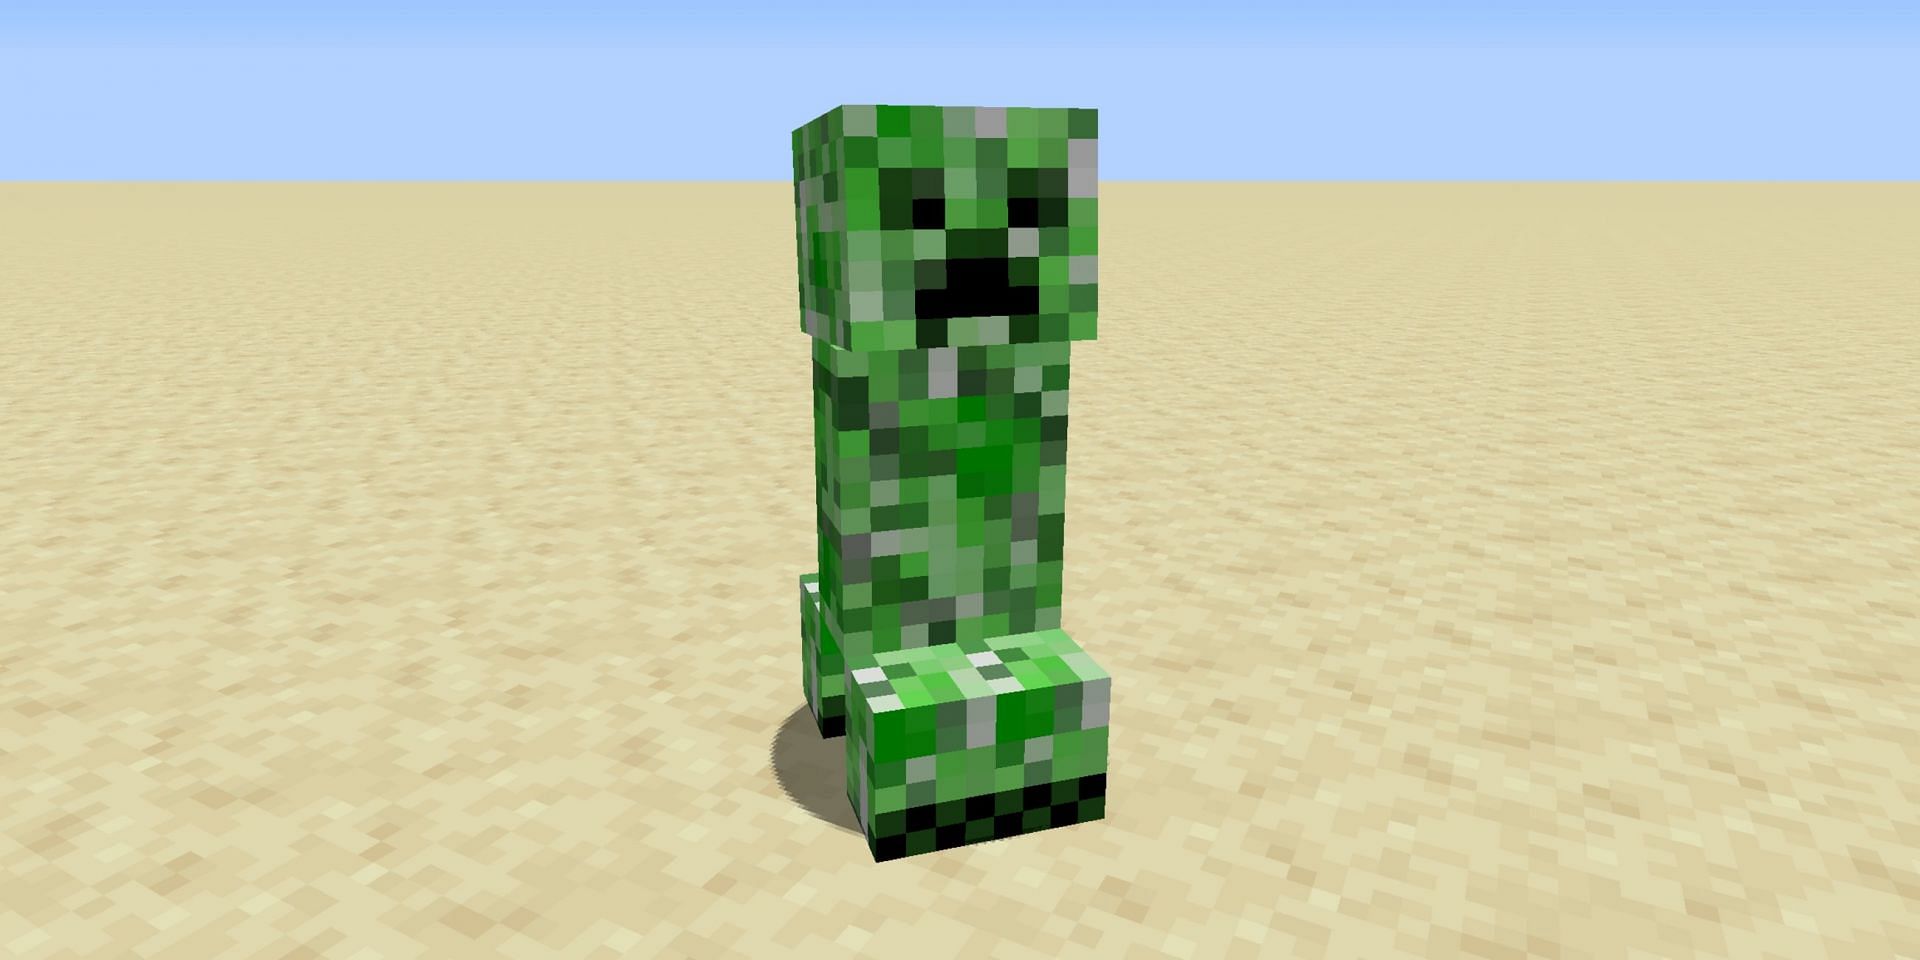 Players can protect themselves from creeper explosions with quick thinking and a building block or two (Image via Mojang)